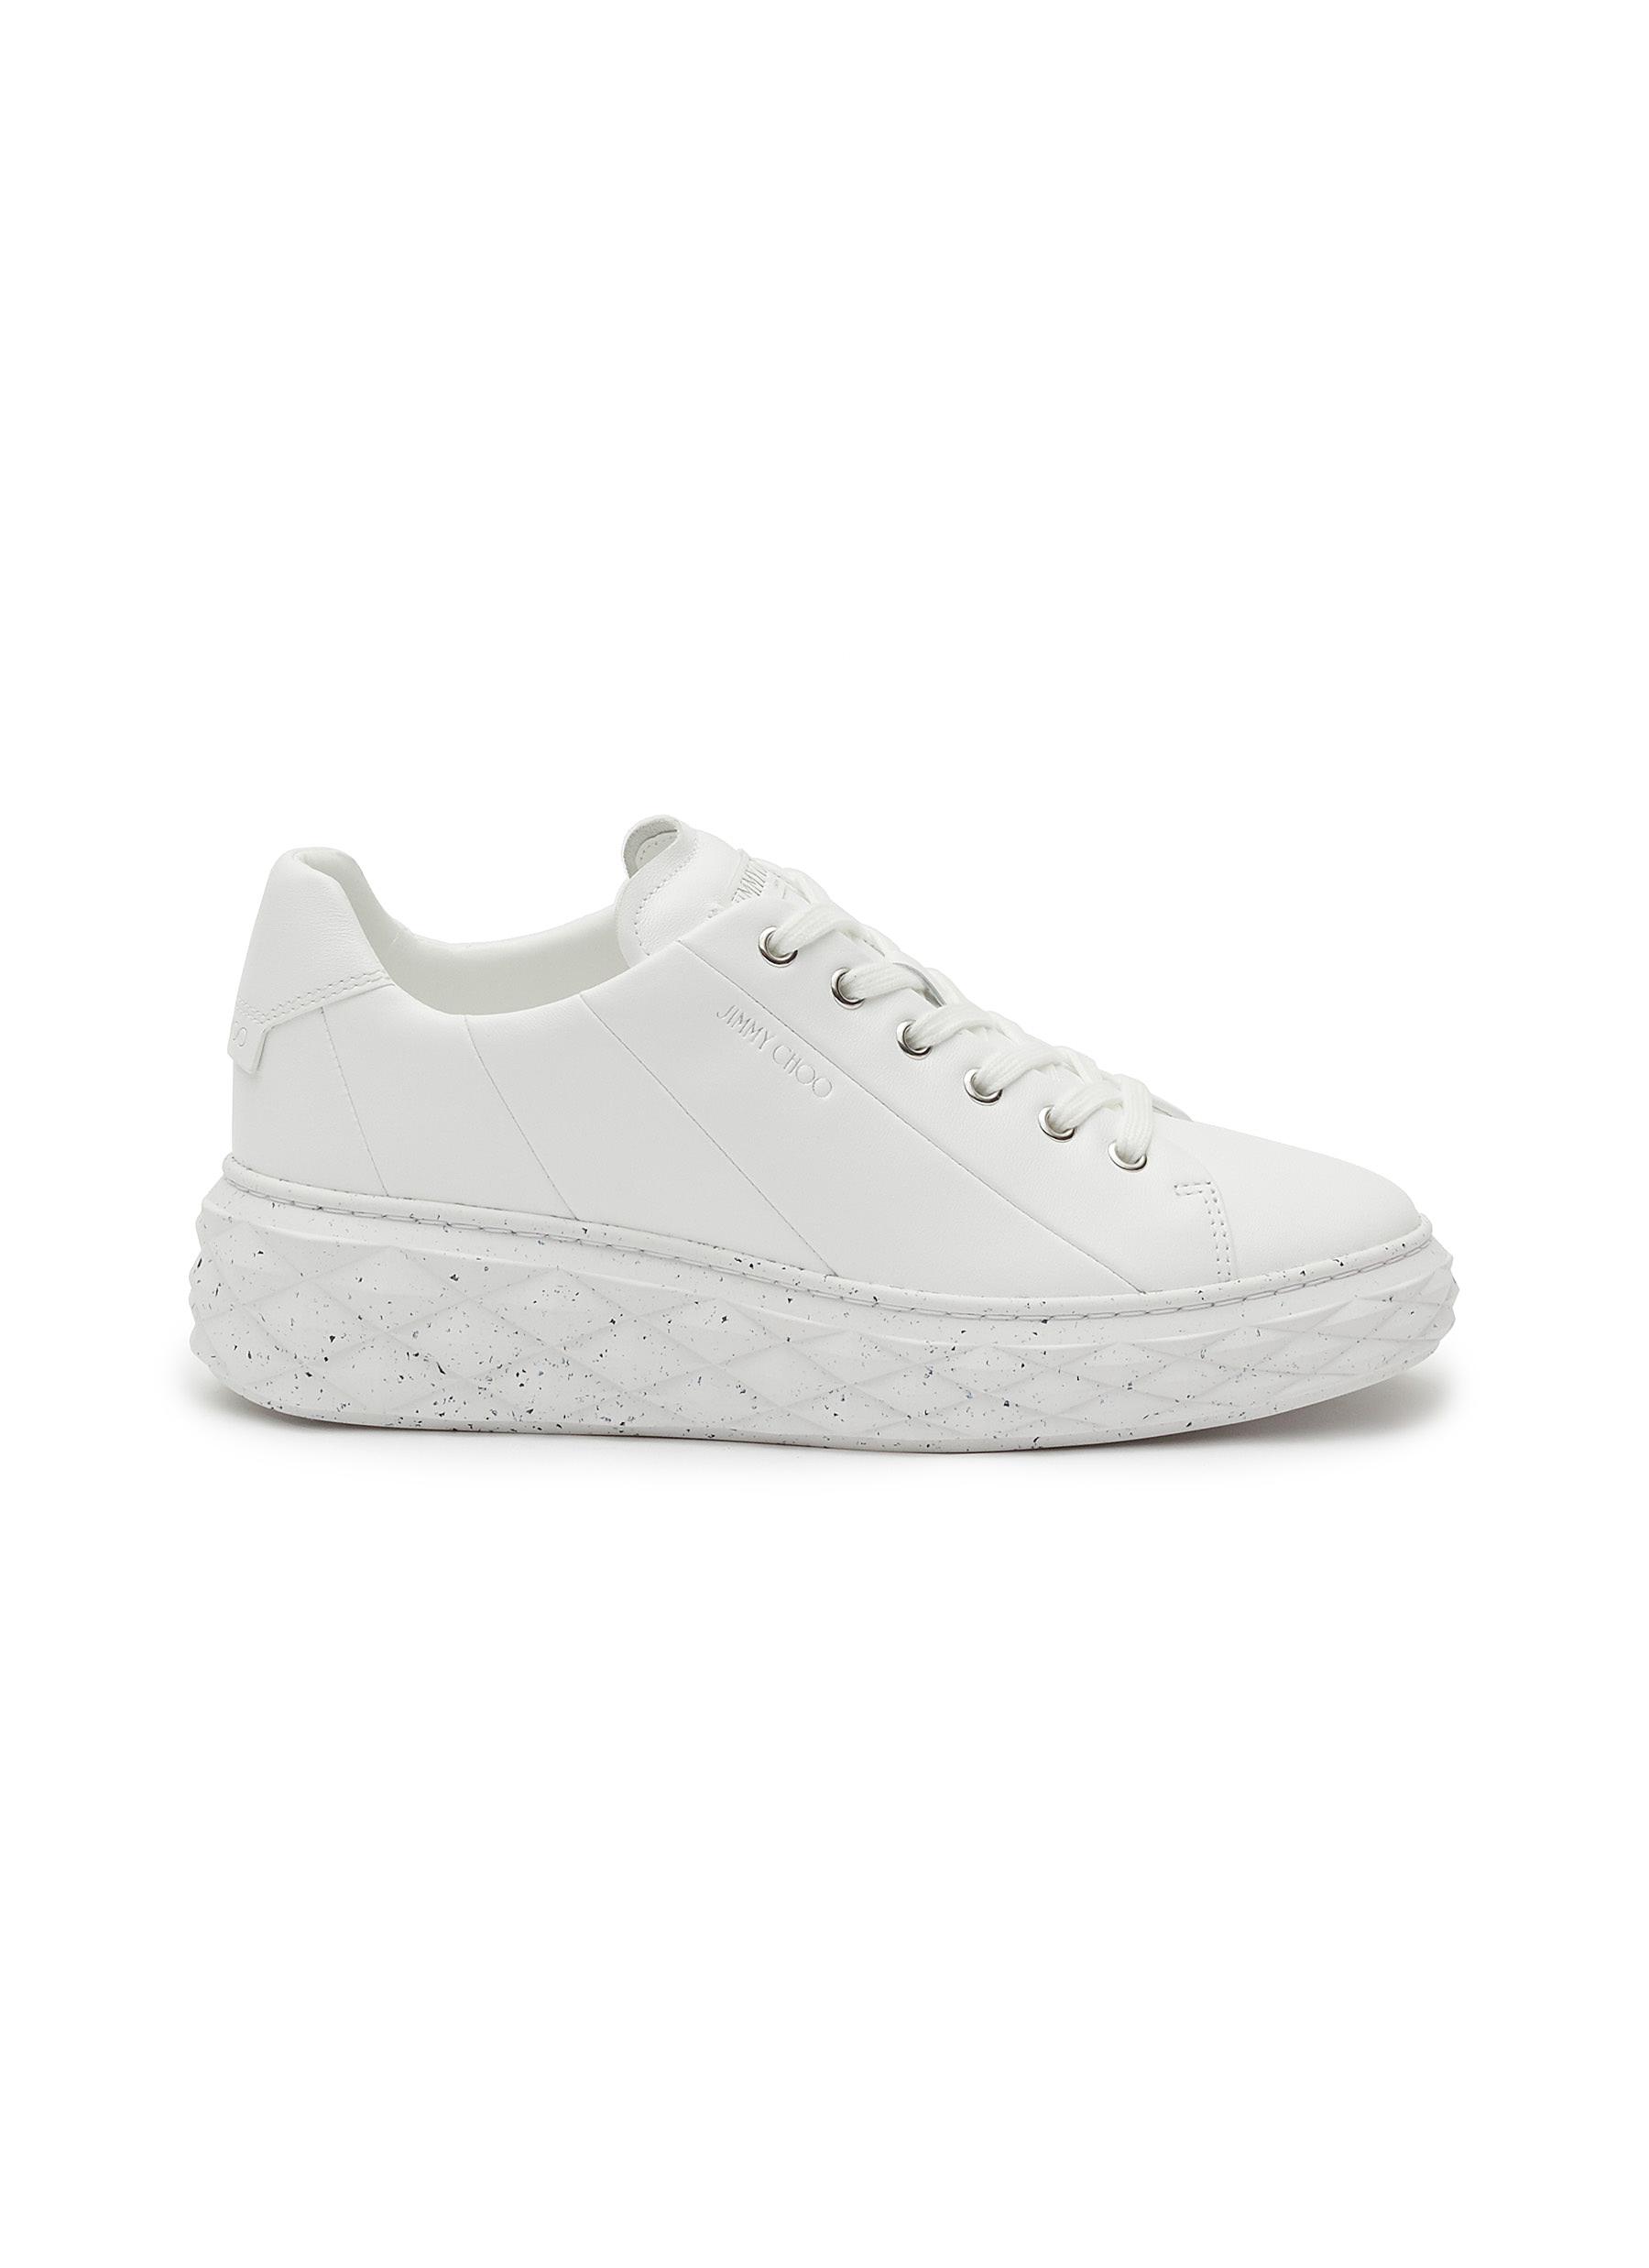 ‘Diamond' Low Top Lace Up Leather Sneakers